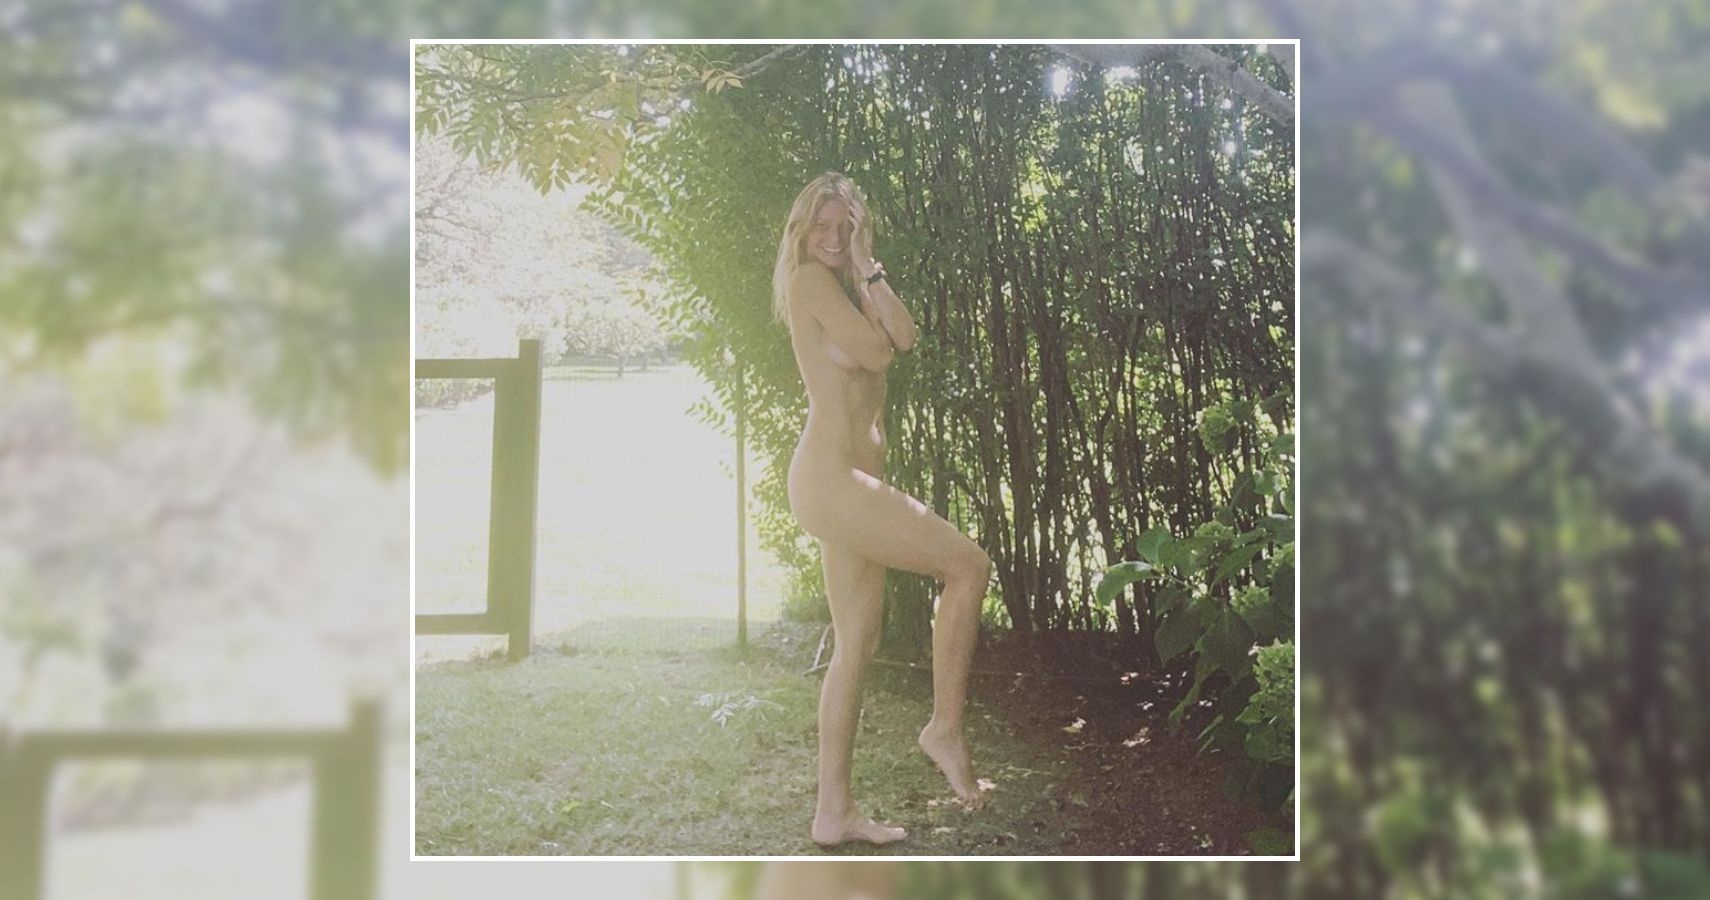 Gwyneth Paltrow's Daughter Had A Hilarious Reaction To Her 'Birthday Suit' Tribute